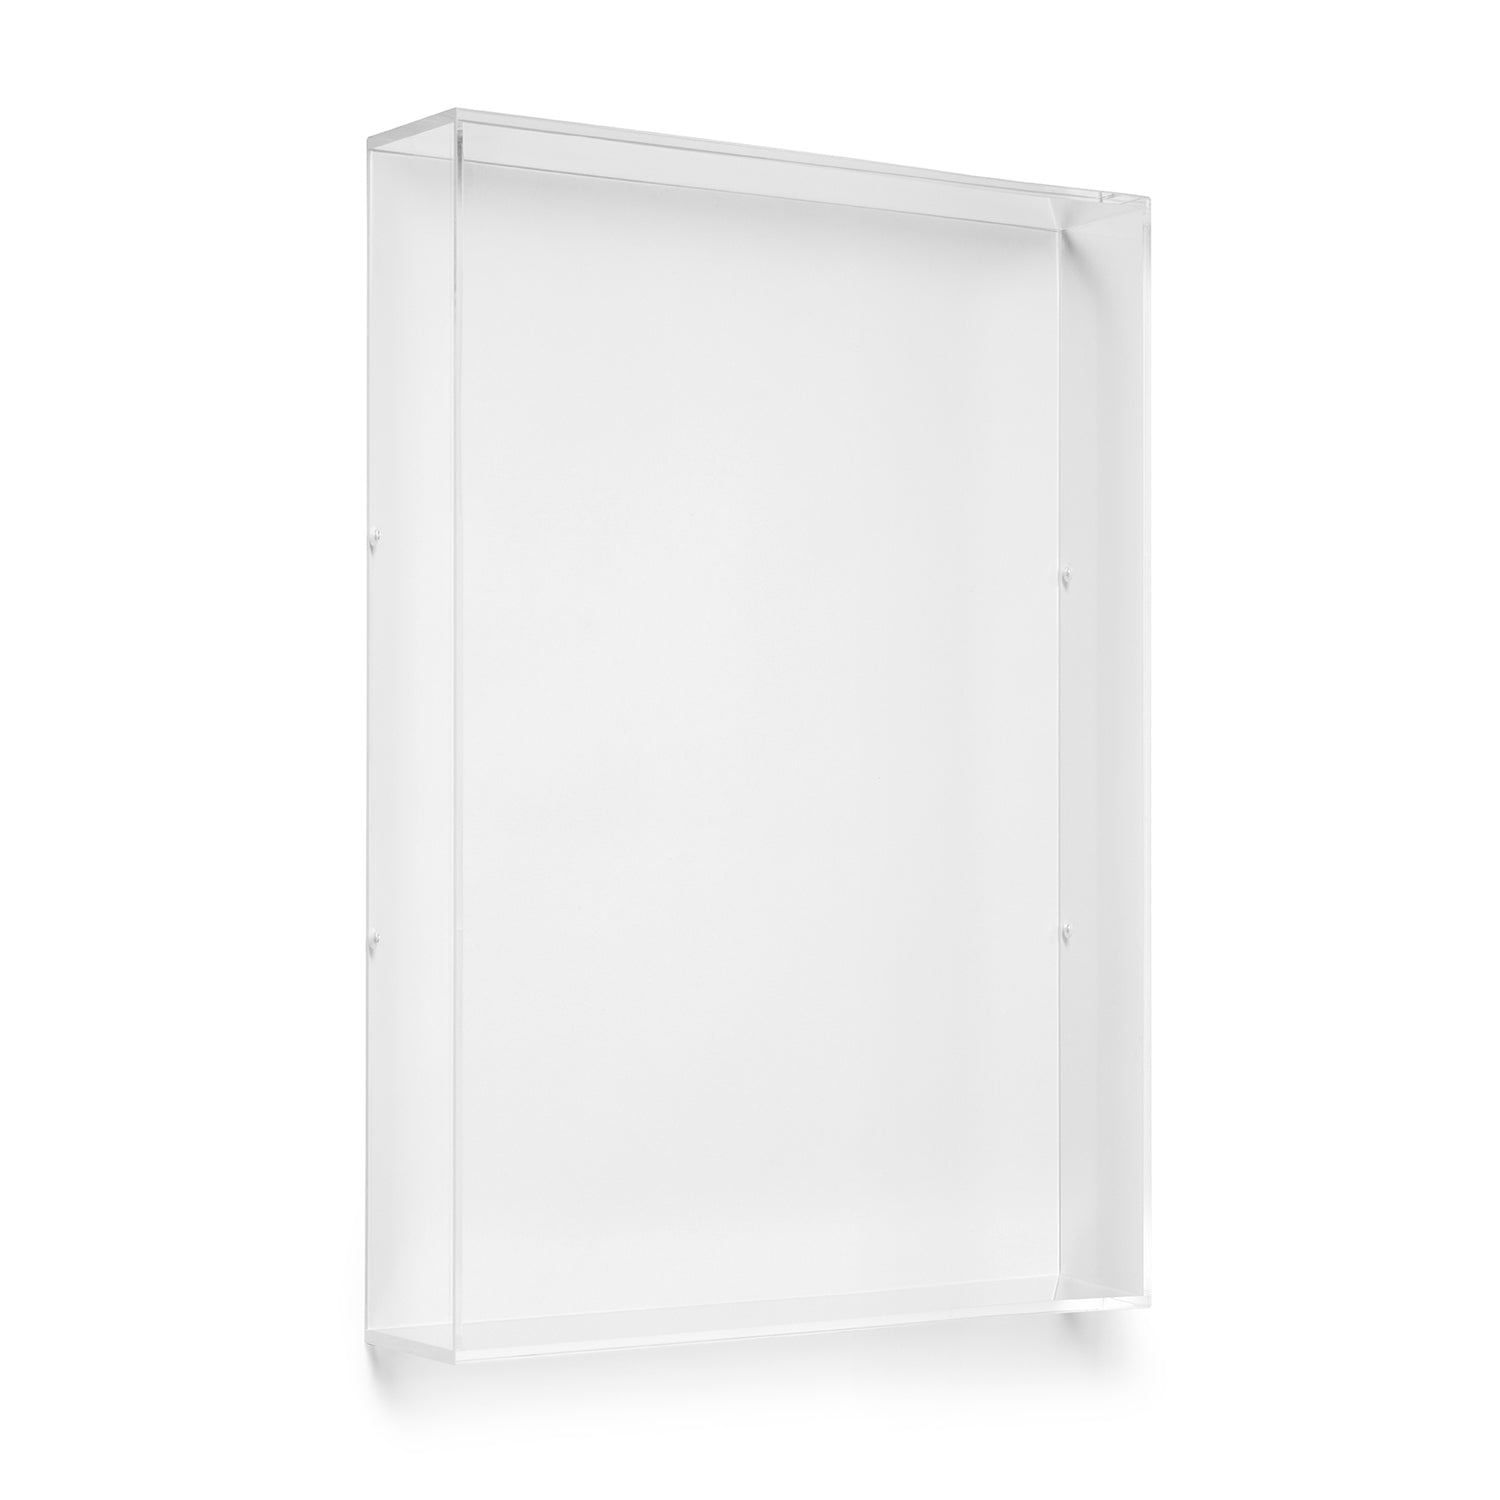 Case Pack of Modern Acrylic Shadowbox Lids Only 2